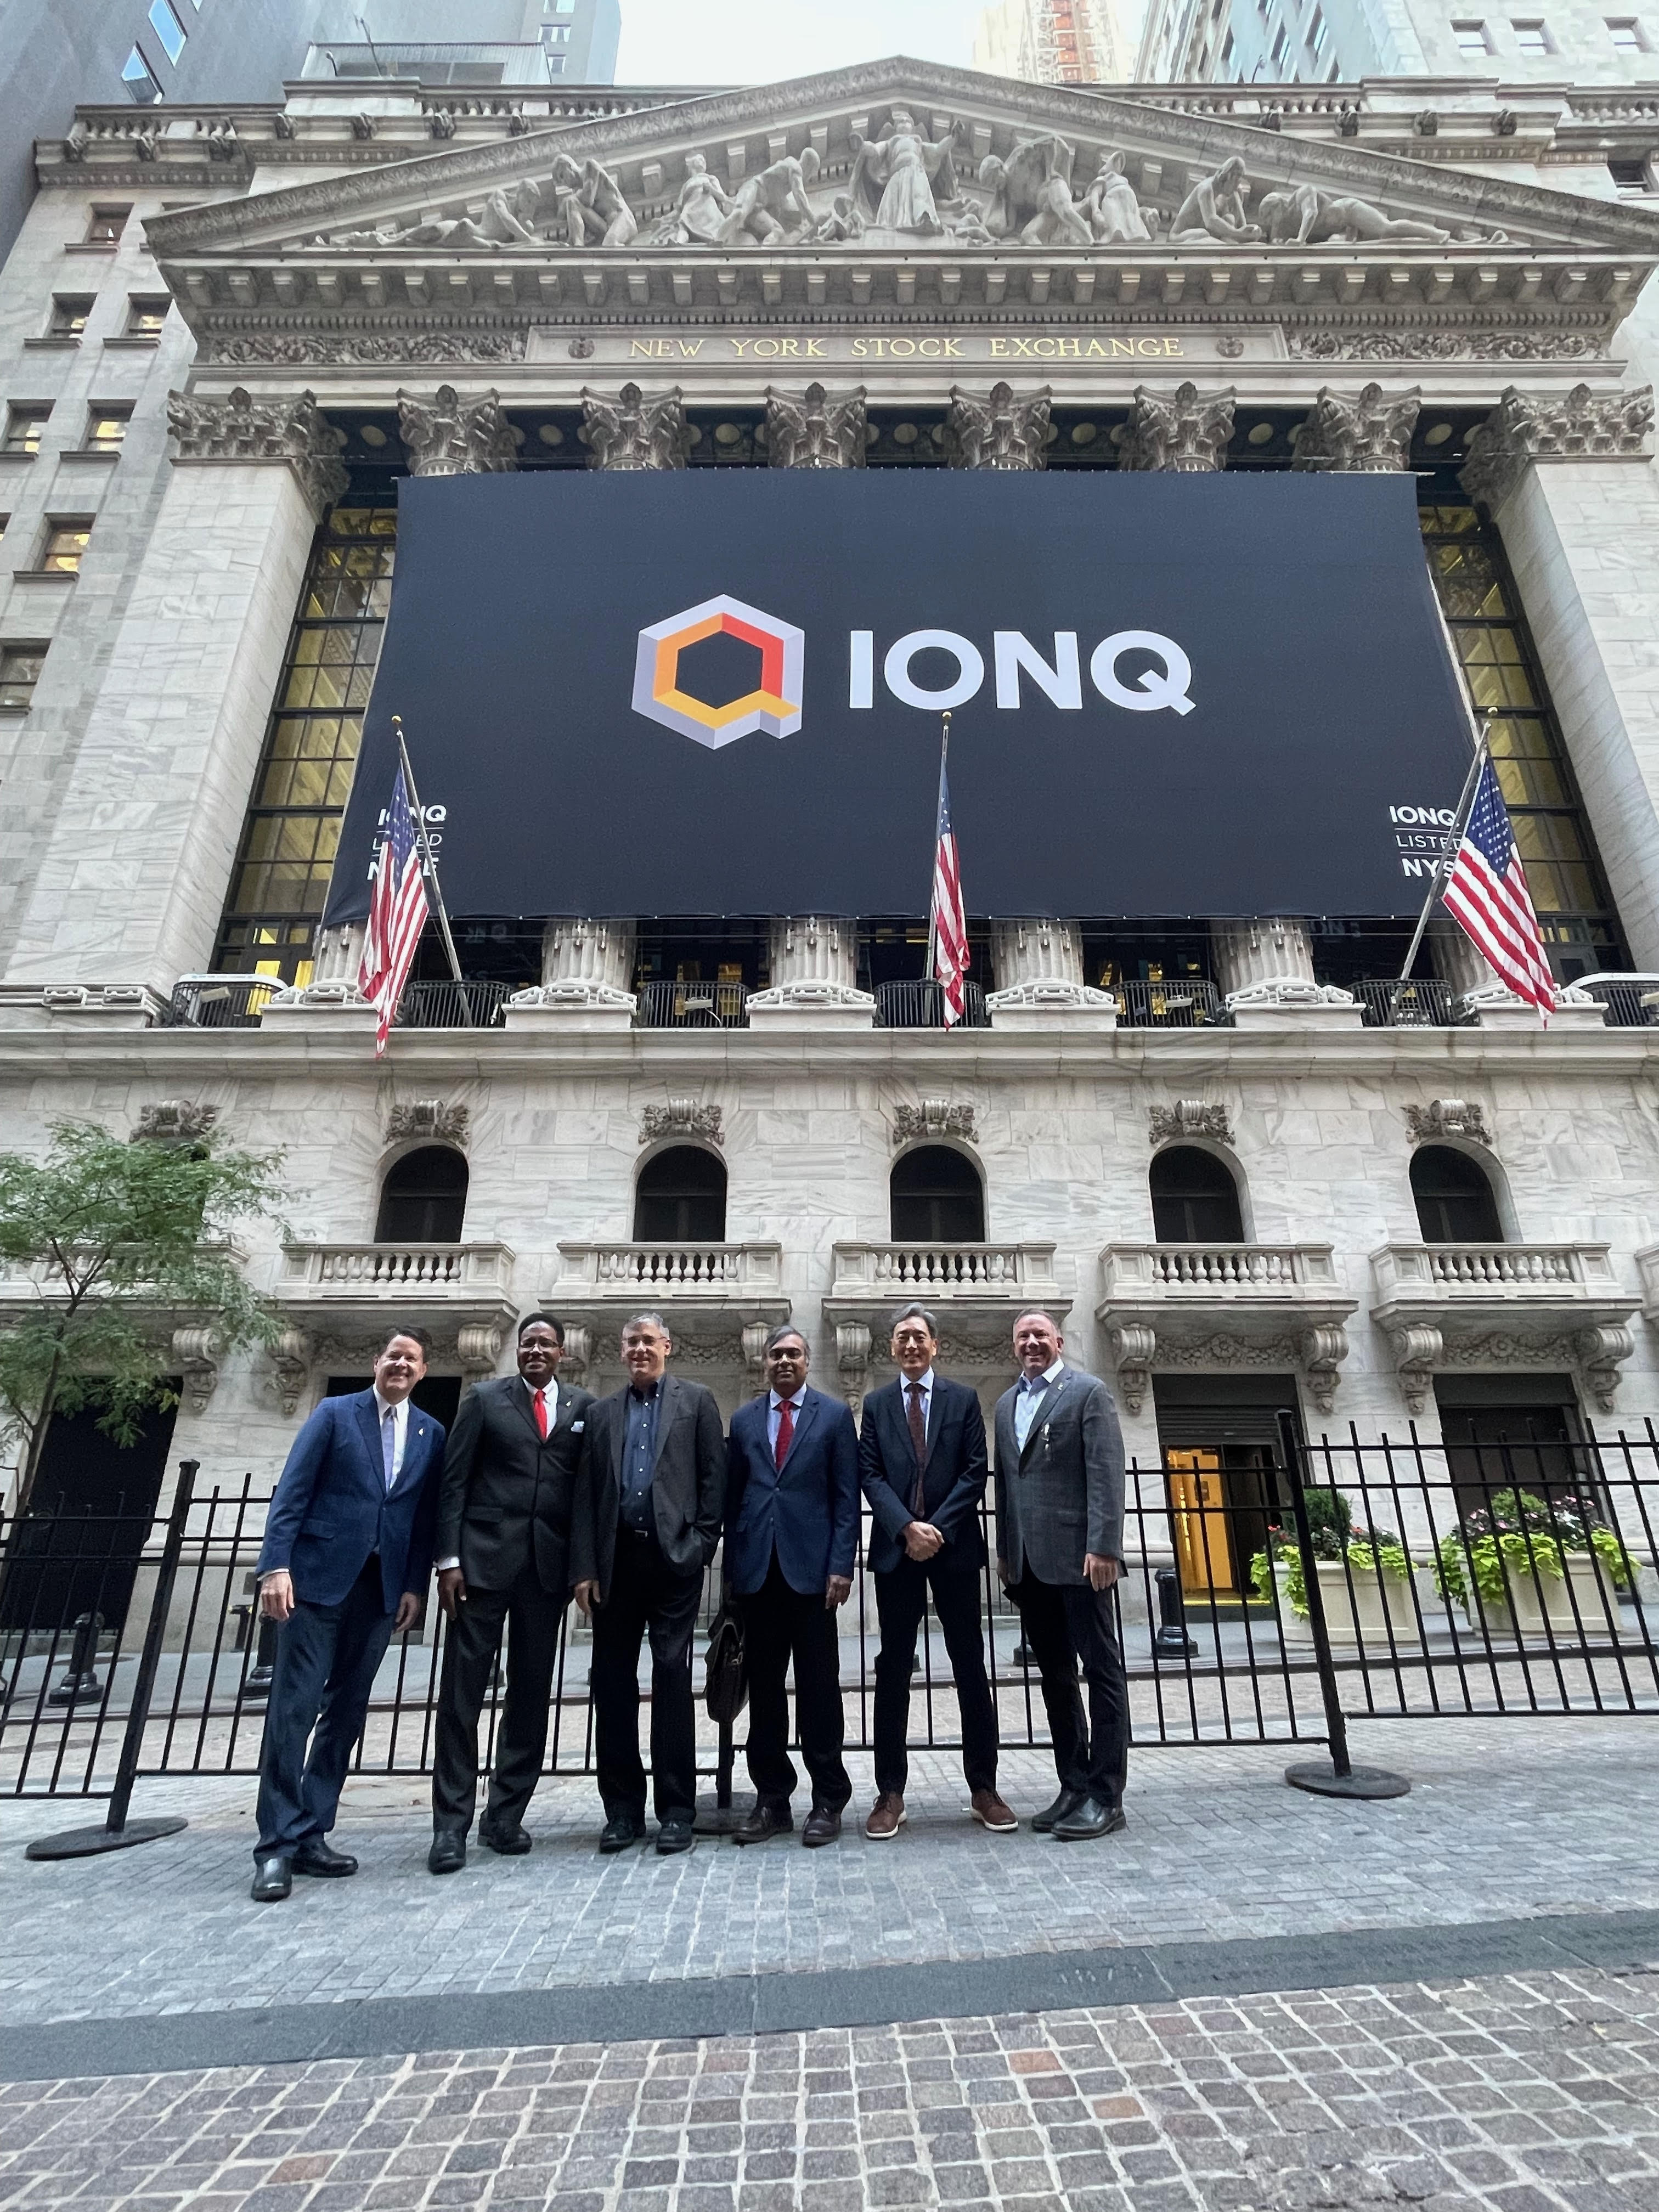 IonQ debuts on the NYSE, 10/1/21.